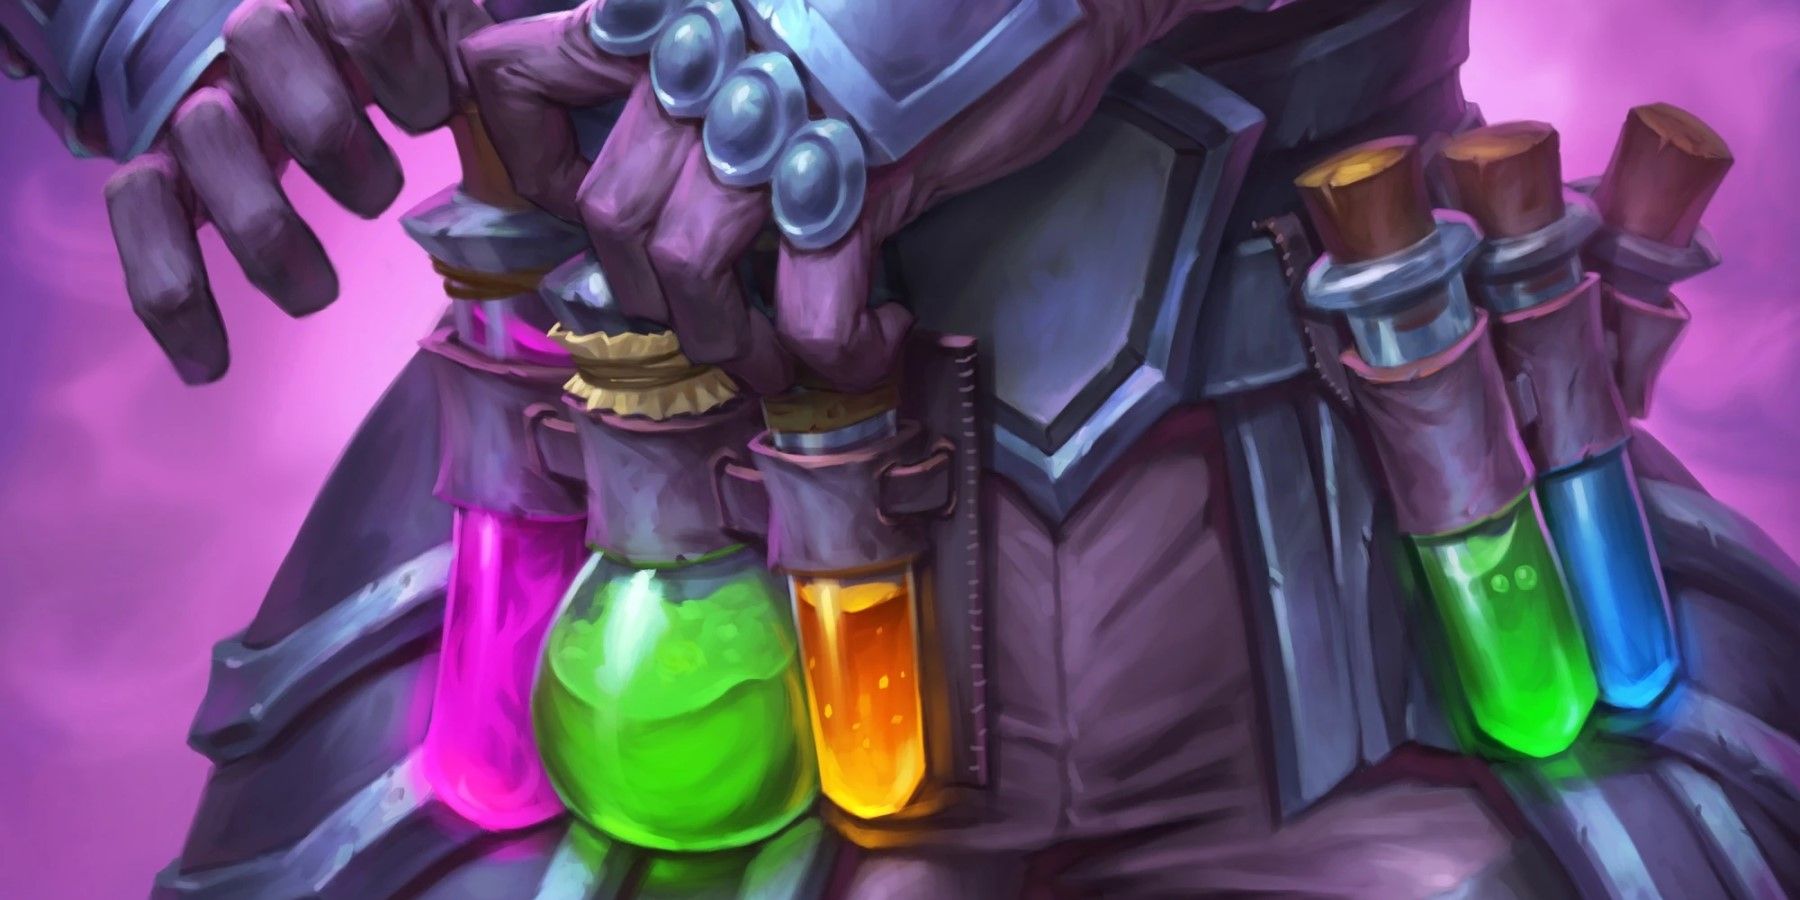 potion belt card art from hearthstone showing a rogue with five brightly colored tonics